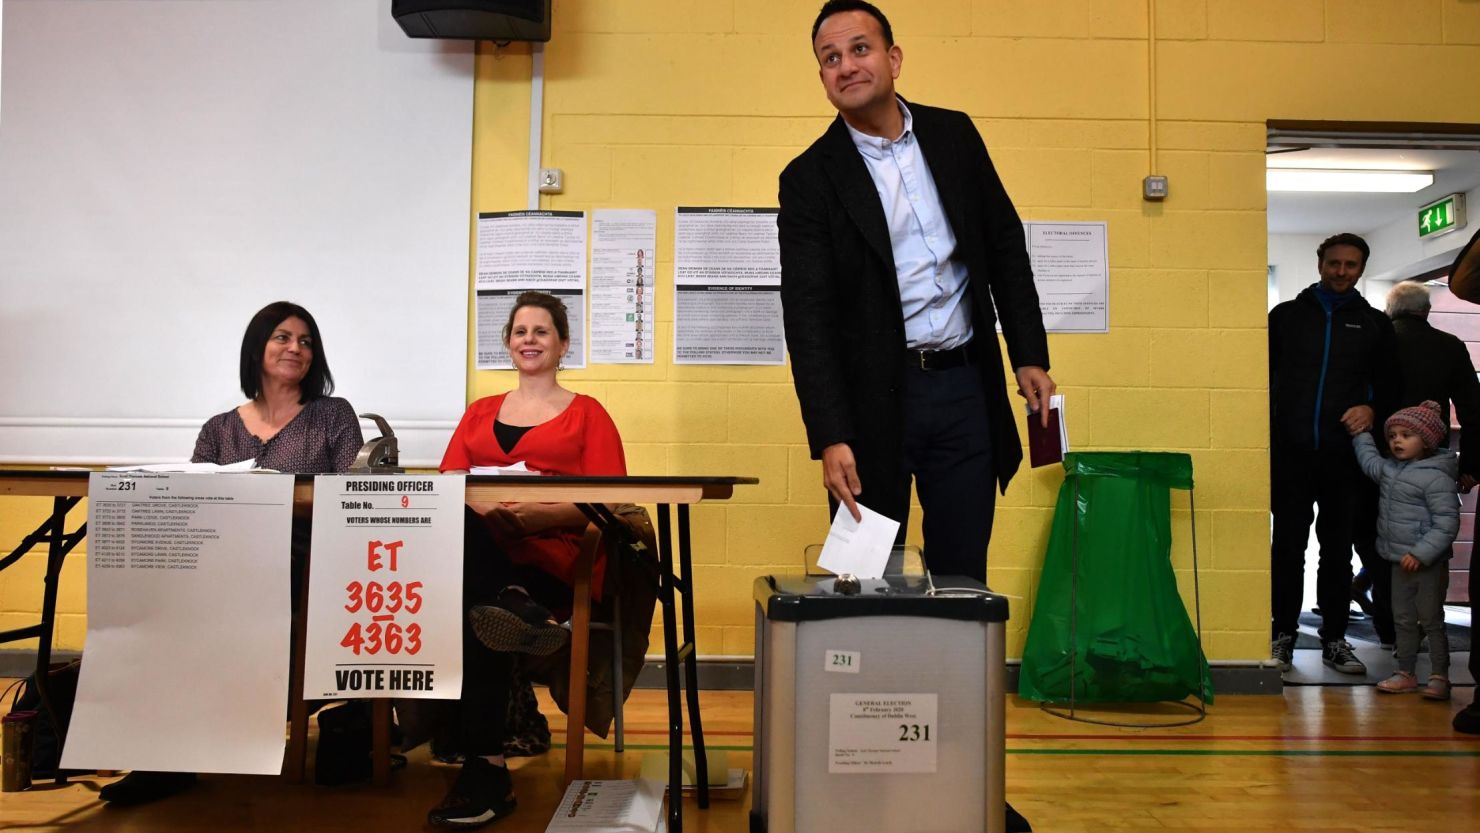 Ireland's leader Leo Varadkar casts his vote at a polling station in Castleknock, Dublin on February 8, 2020.